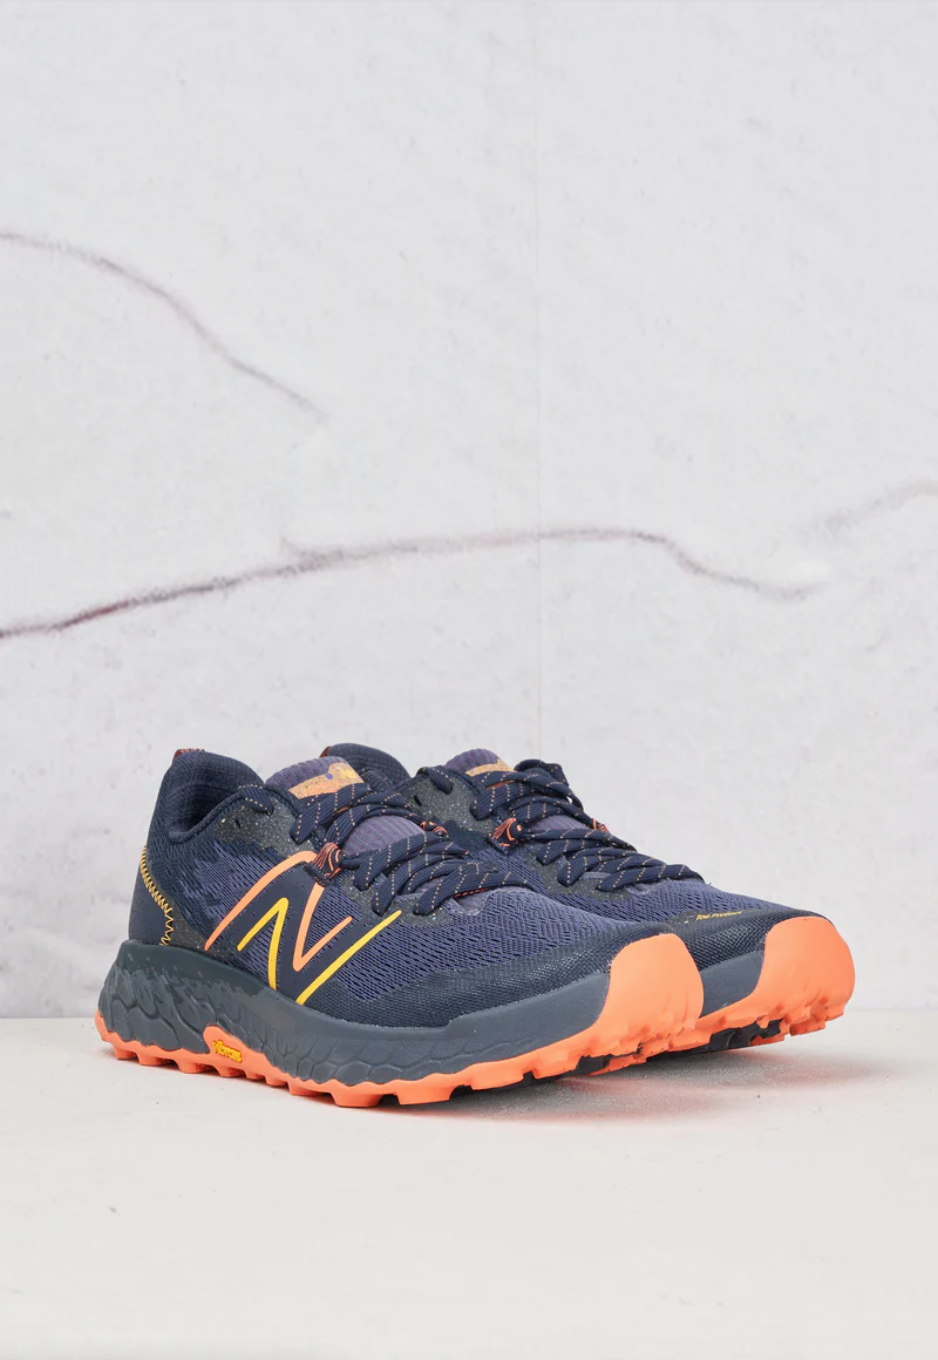 New Balance latest releases